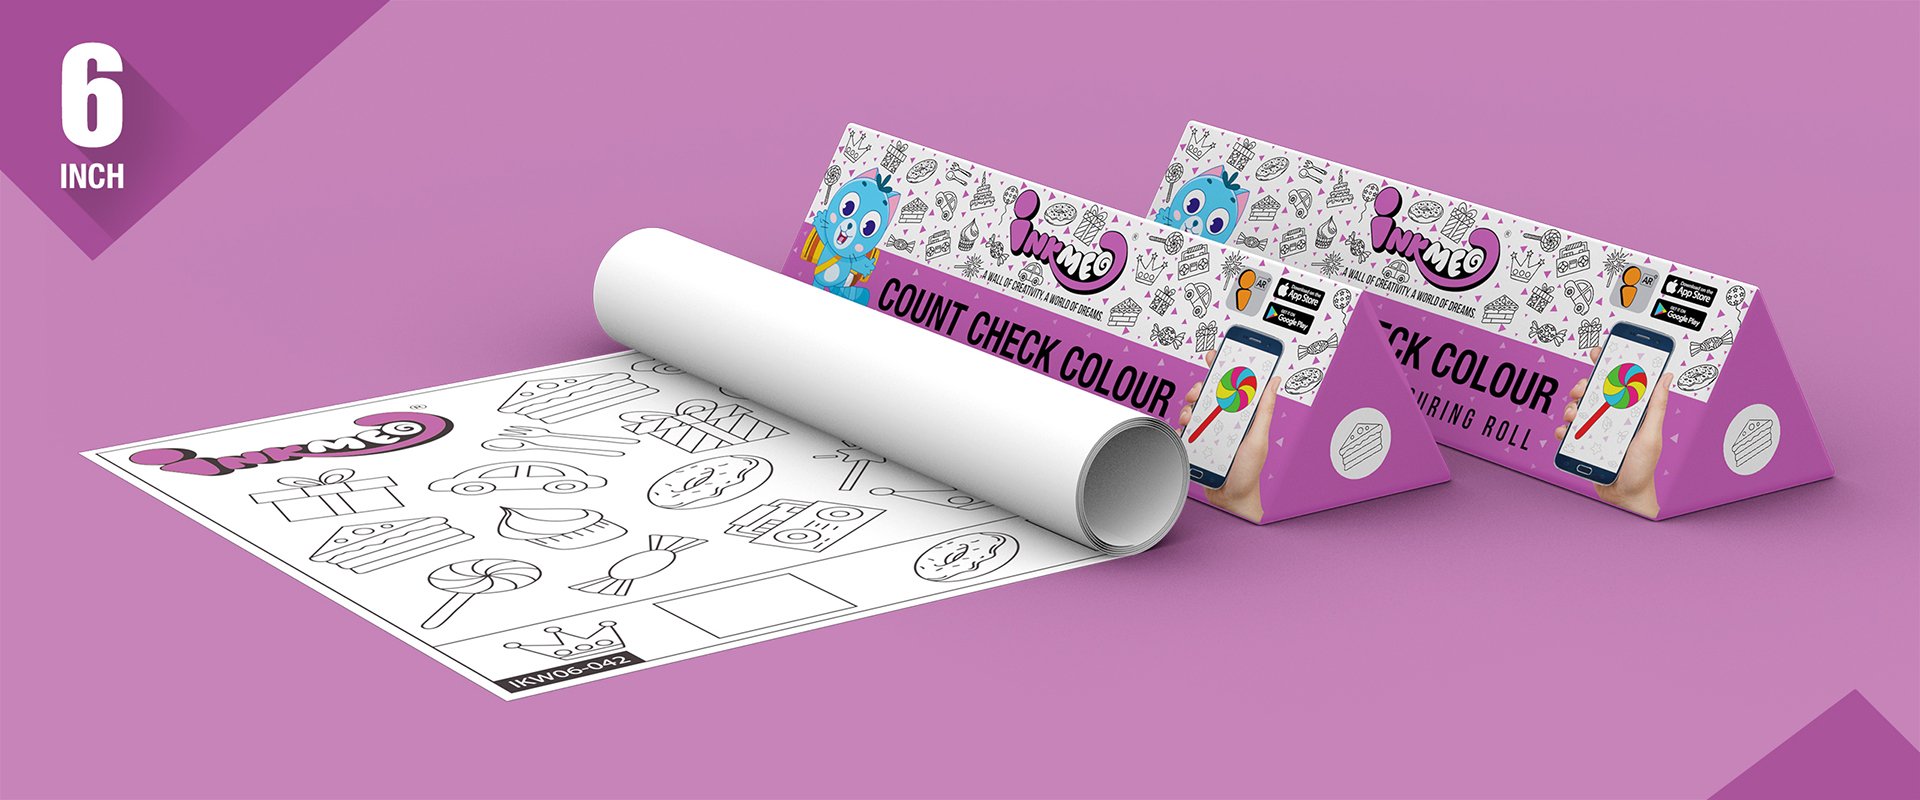 Count Check Colour Colouring Roll (6 inch) - Inkmeo